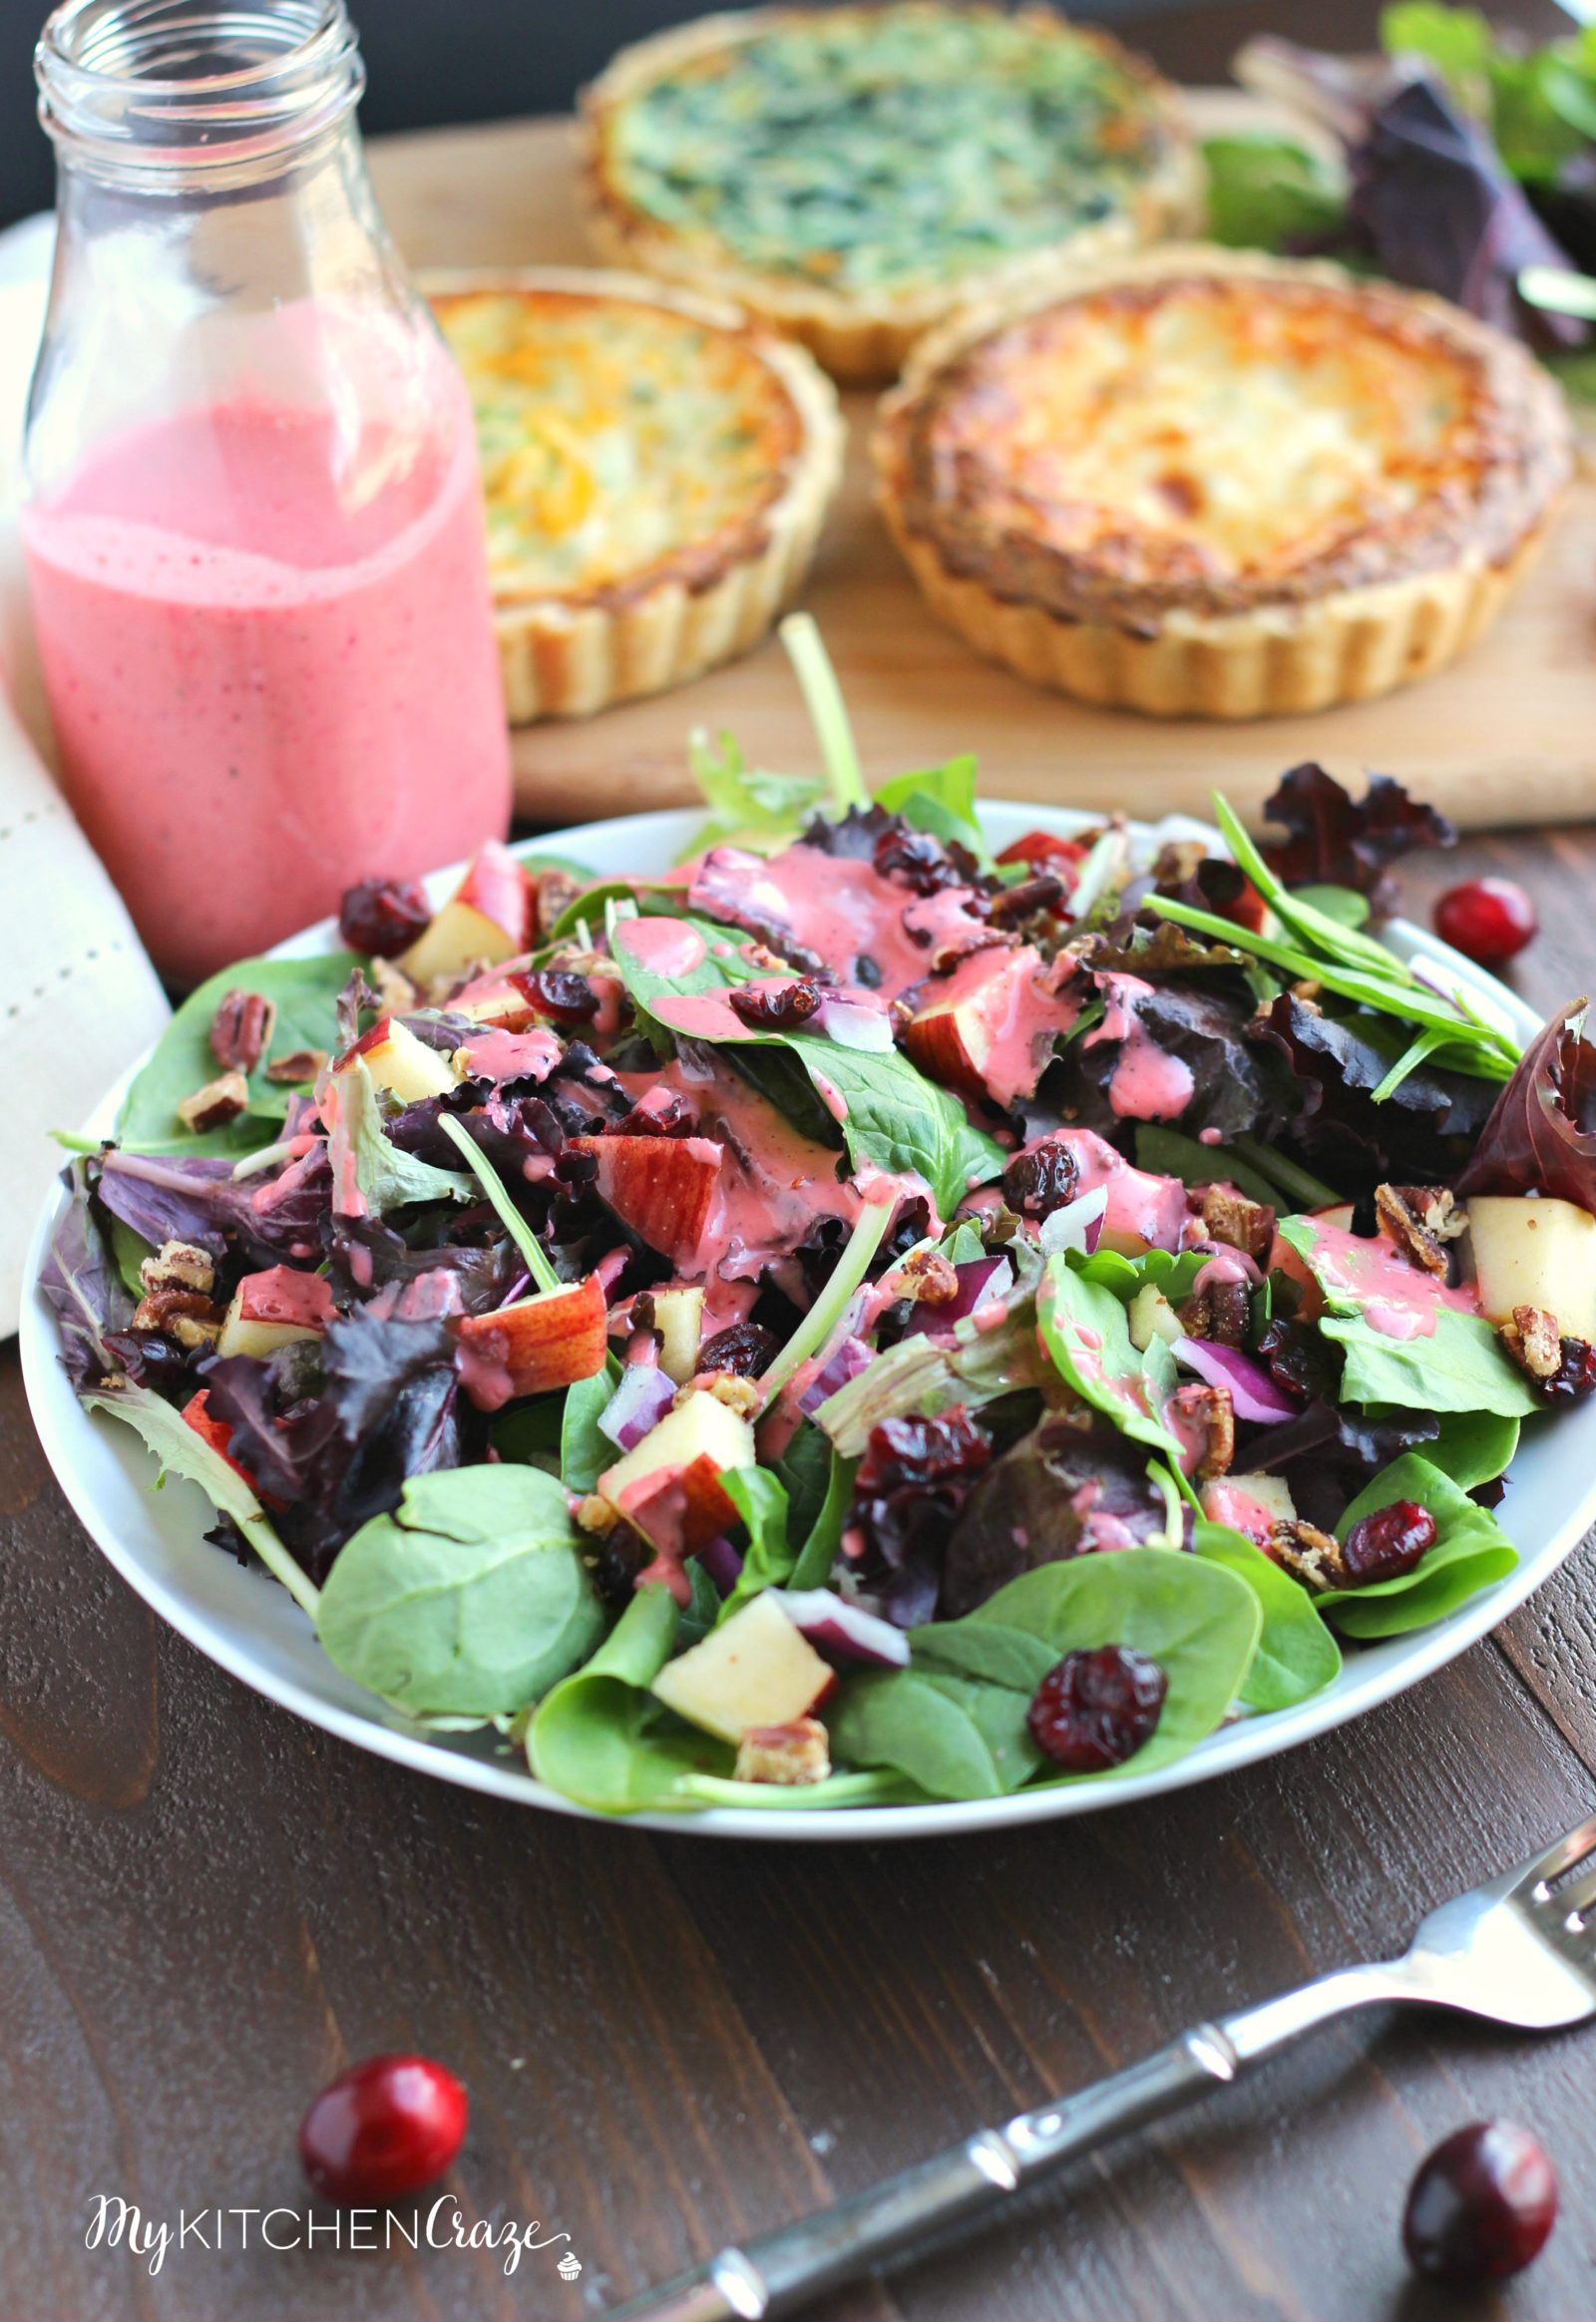 Cranberry Apple Spring Mix Salad ~ mykitchencraze.com ~ Enjoy this delicious holiday spring mix salad. Loaded with apples, pecans, dried cranberries and a decadent cranberry vinaigrette.